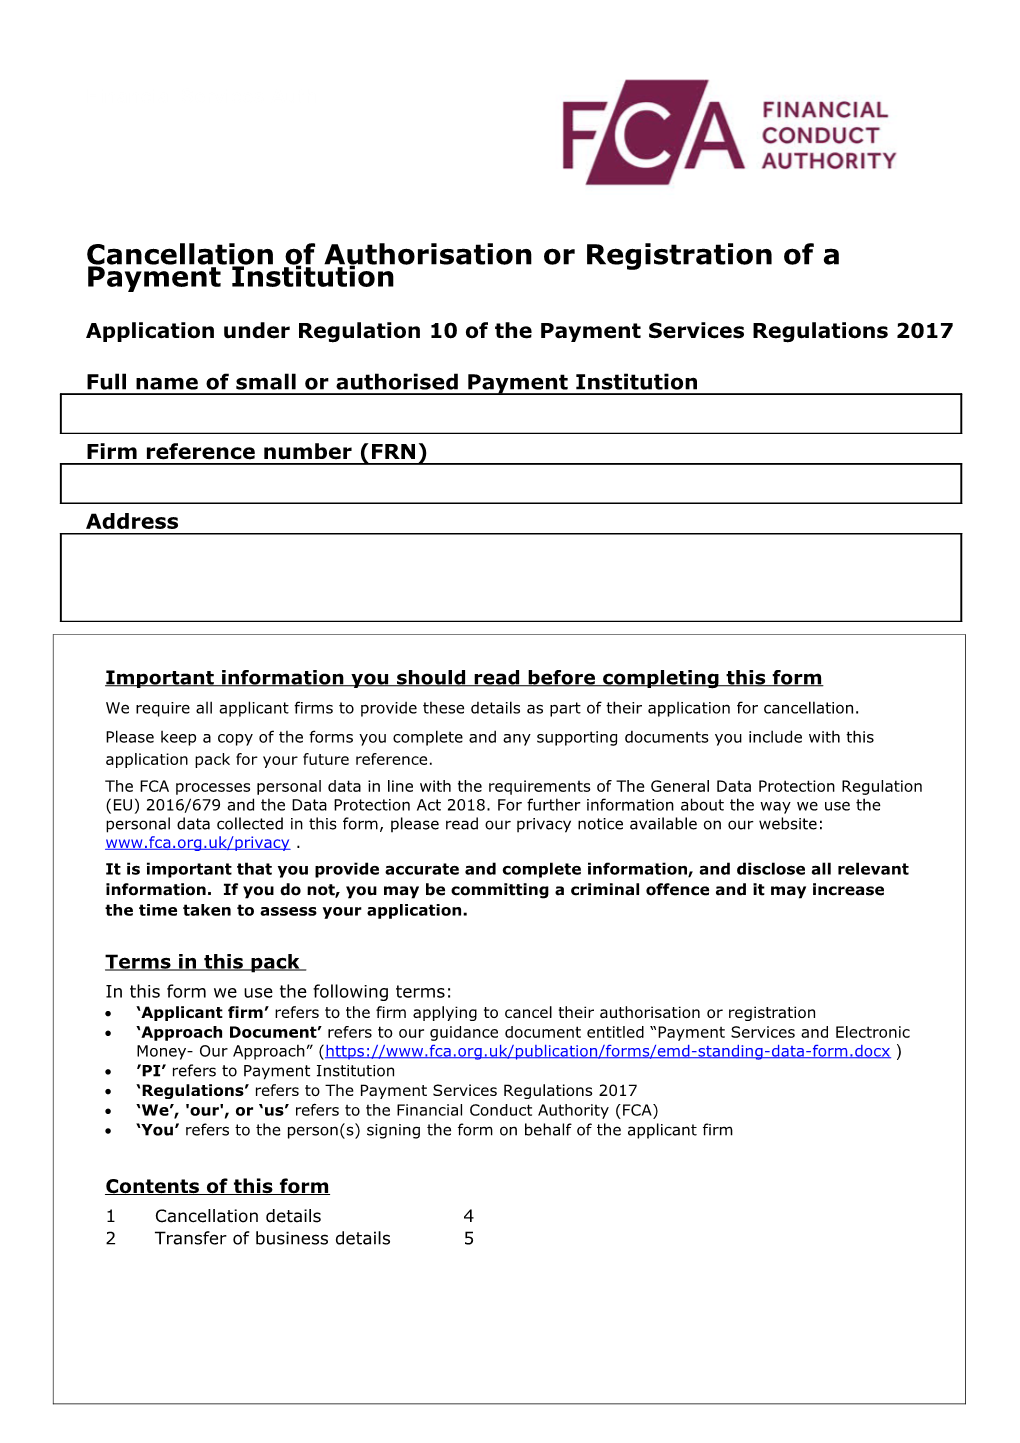 Cancellation of Authorisation Or Registration of a Payment Institution